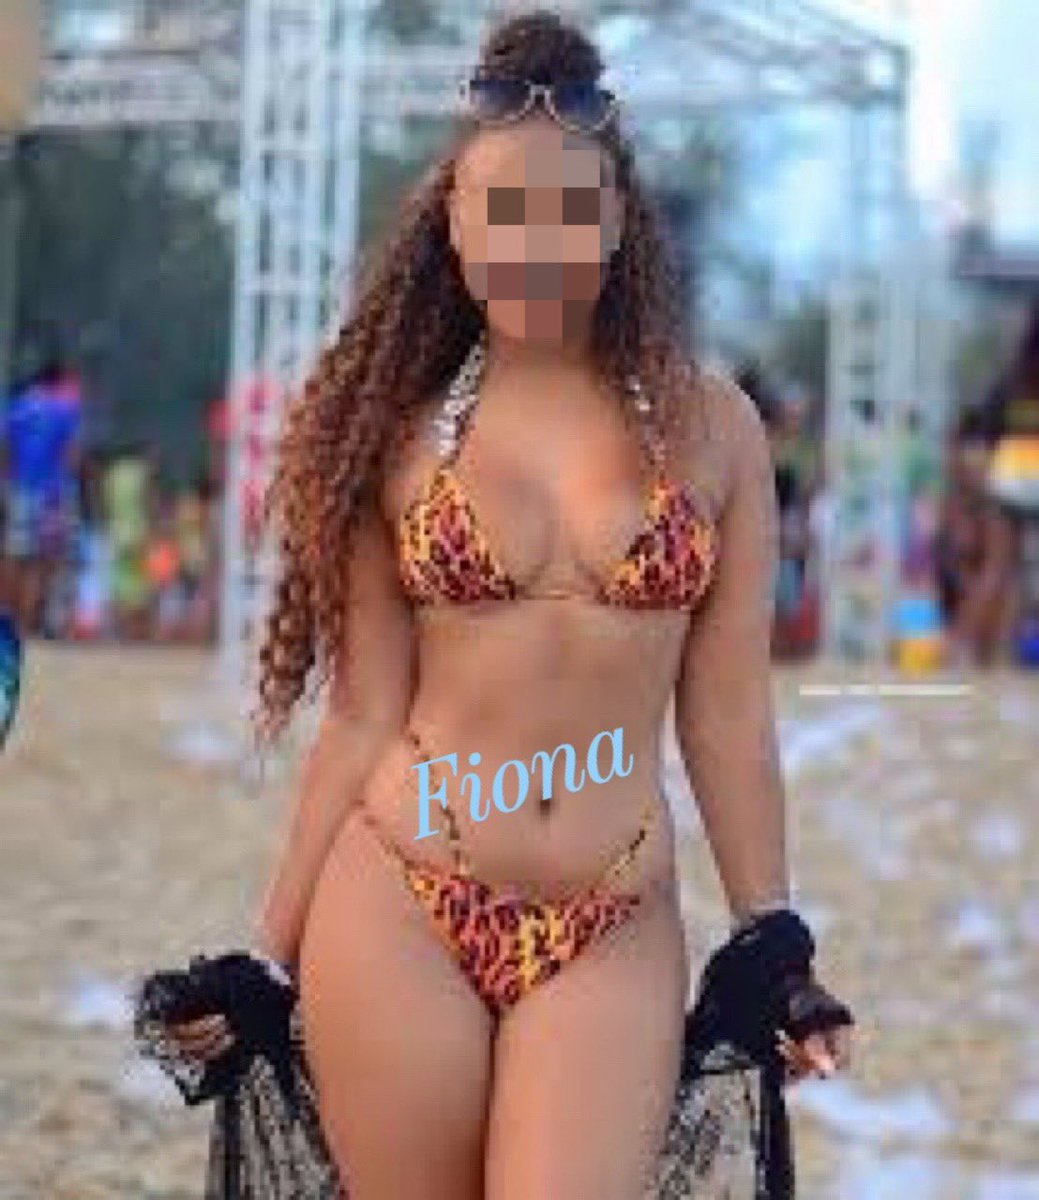 Tuesday attendants:

Fiona - new girl Fiona from the Caribbean. Wonderful body and skills to enjoy
Jenny - sweet and slim Korean beauty with nice massage and wonderful services to melt away your stress

15 Karachi Drive
Unit 7
Markham
416-800-4088 https://t.co/9MoJBadNK4